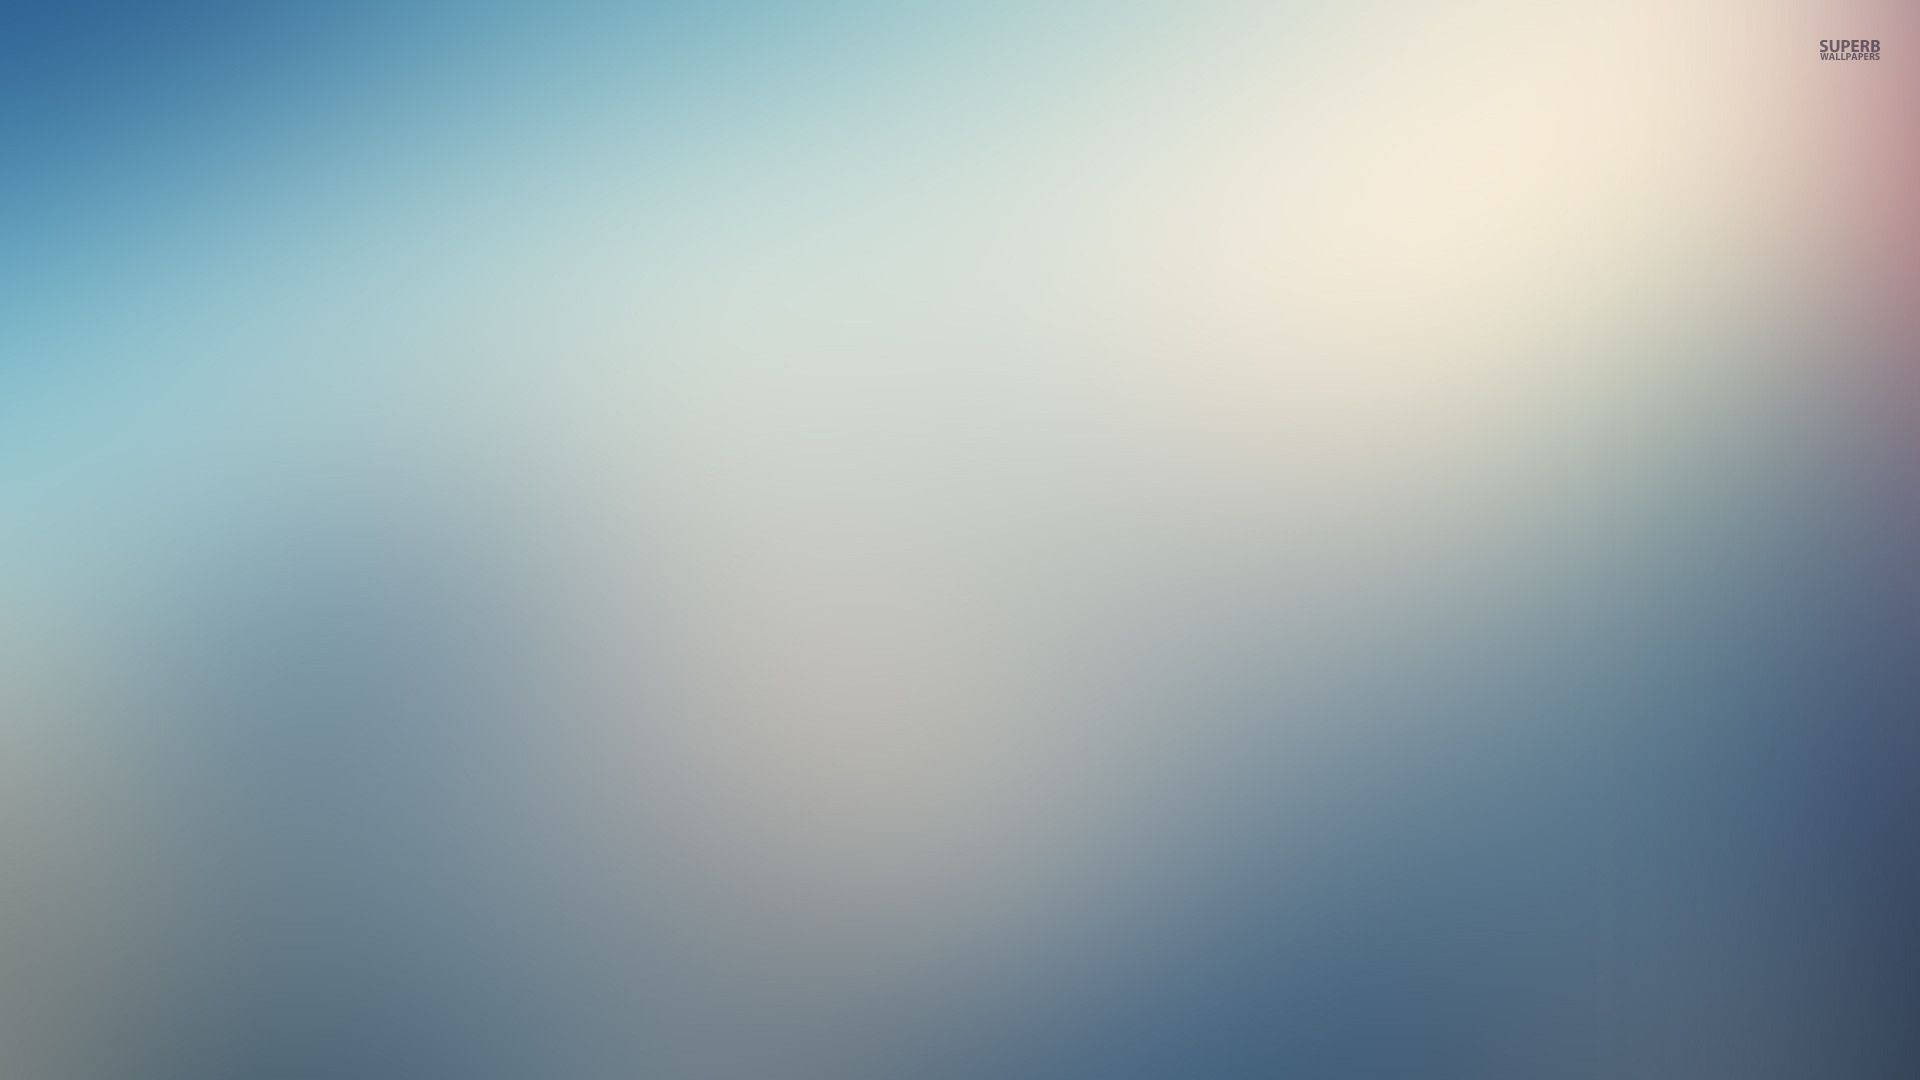 1920x1080 Wallpaper Blue And Silver